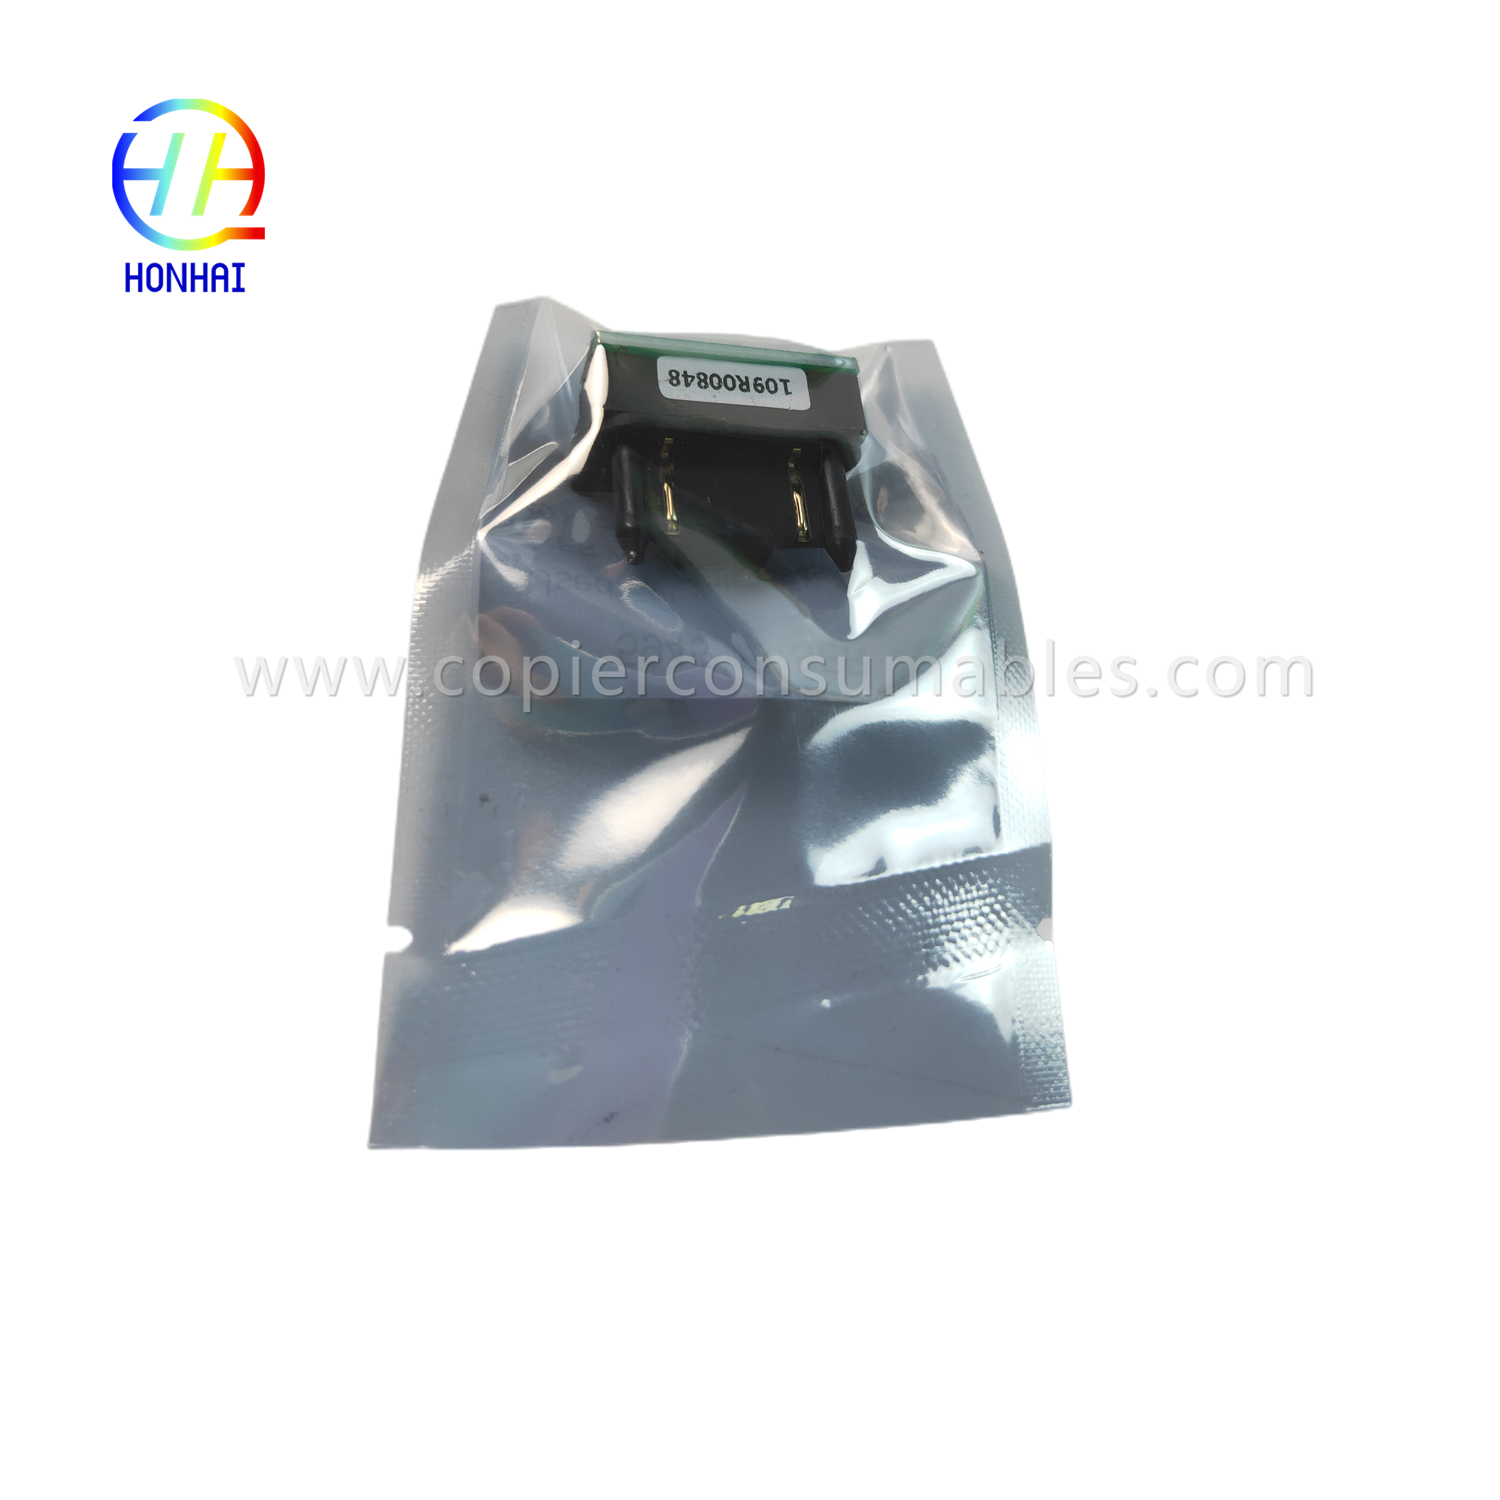 Chip fusore per Xerox Workcentre 5945 5955 109R00848 chip (1)_副本